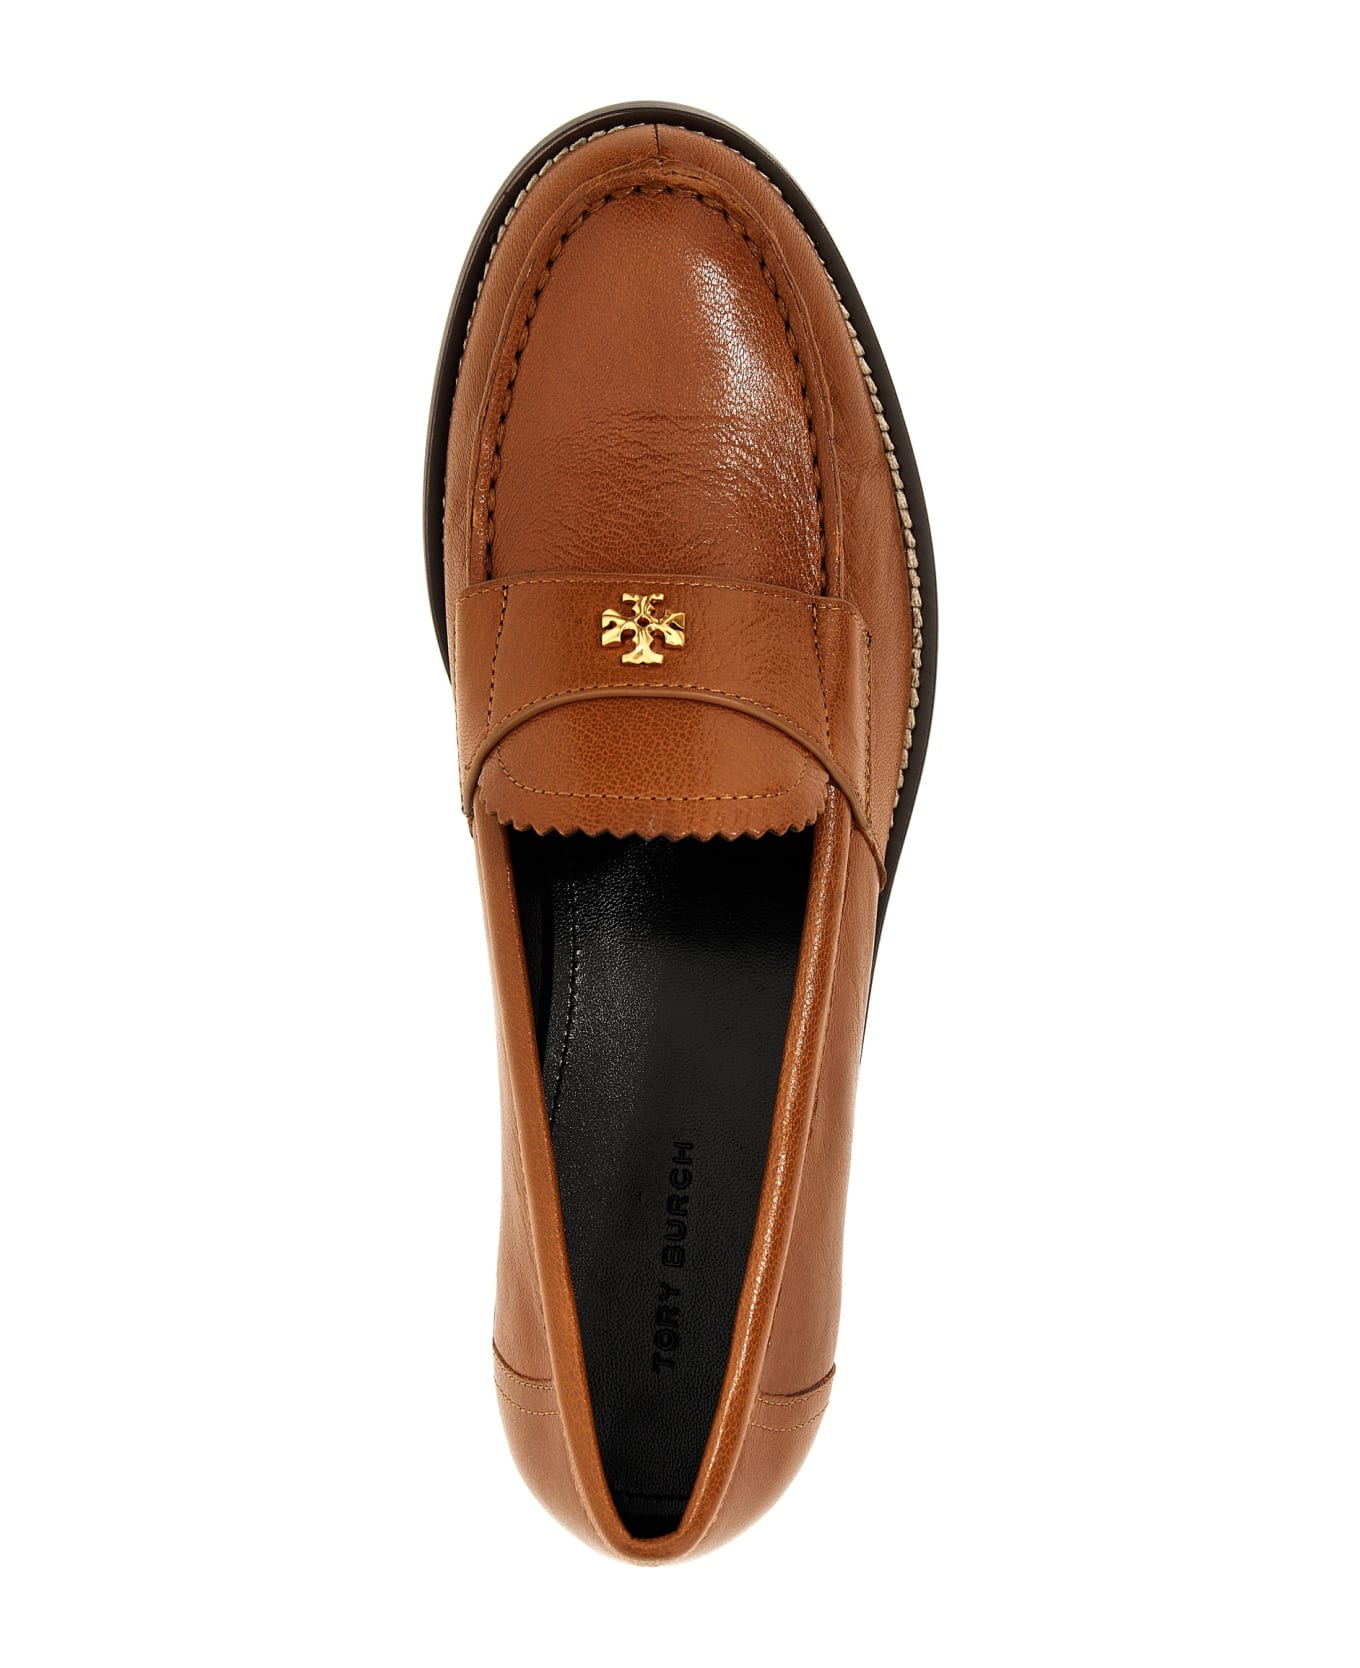 Tory Burch Camel Leather Loafers - Brown フラットシューズ